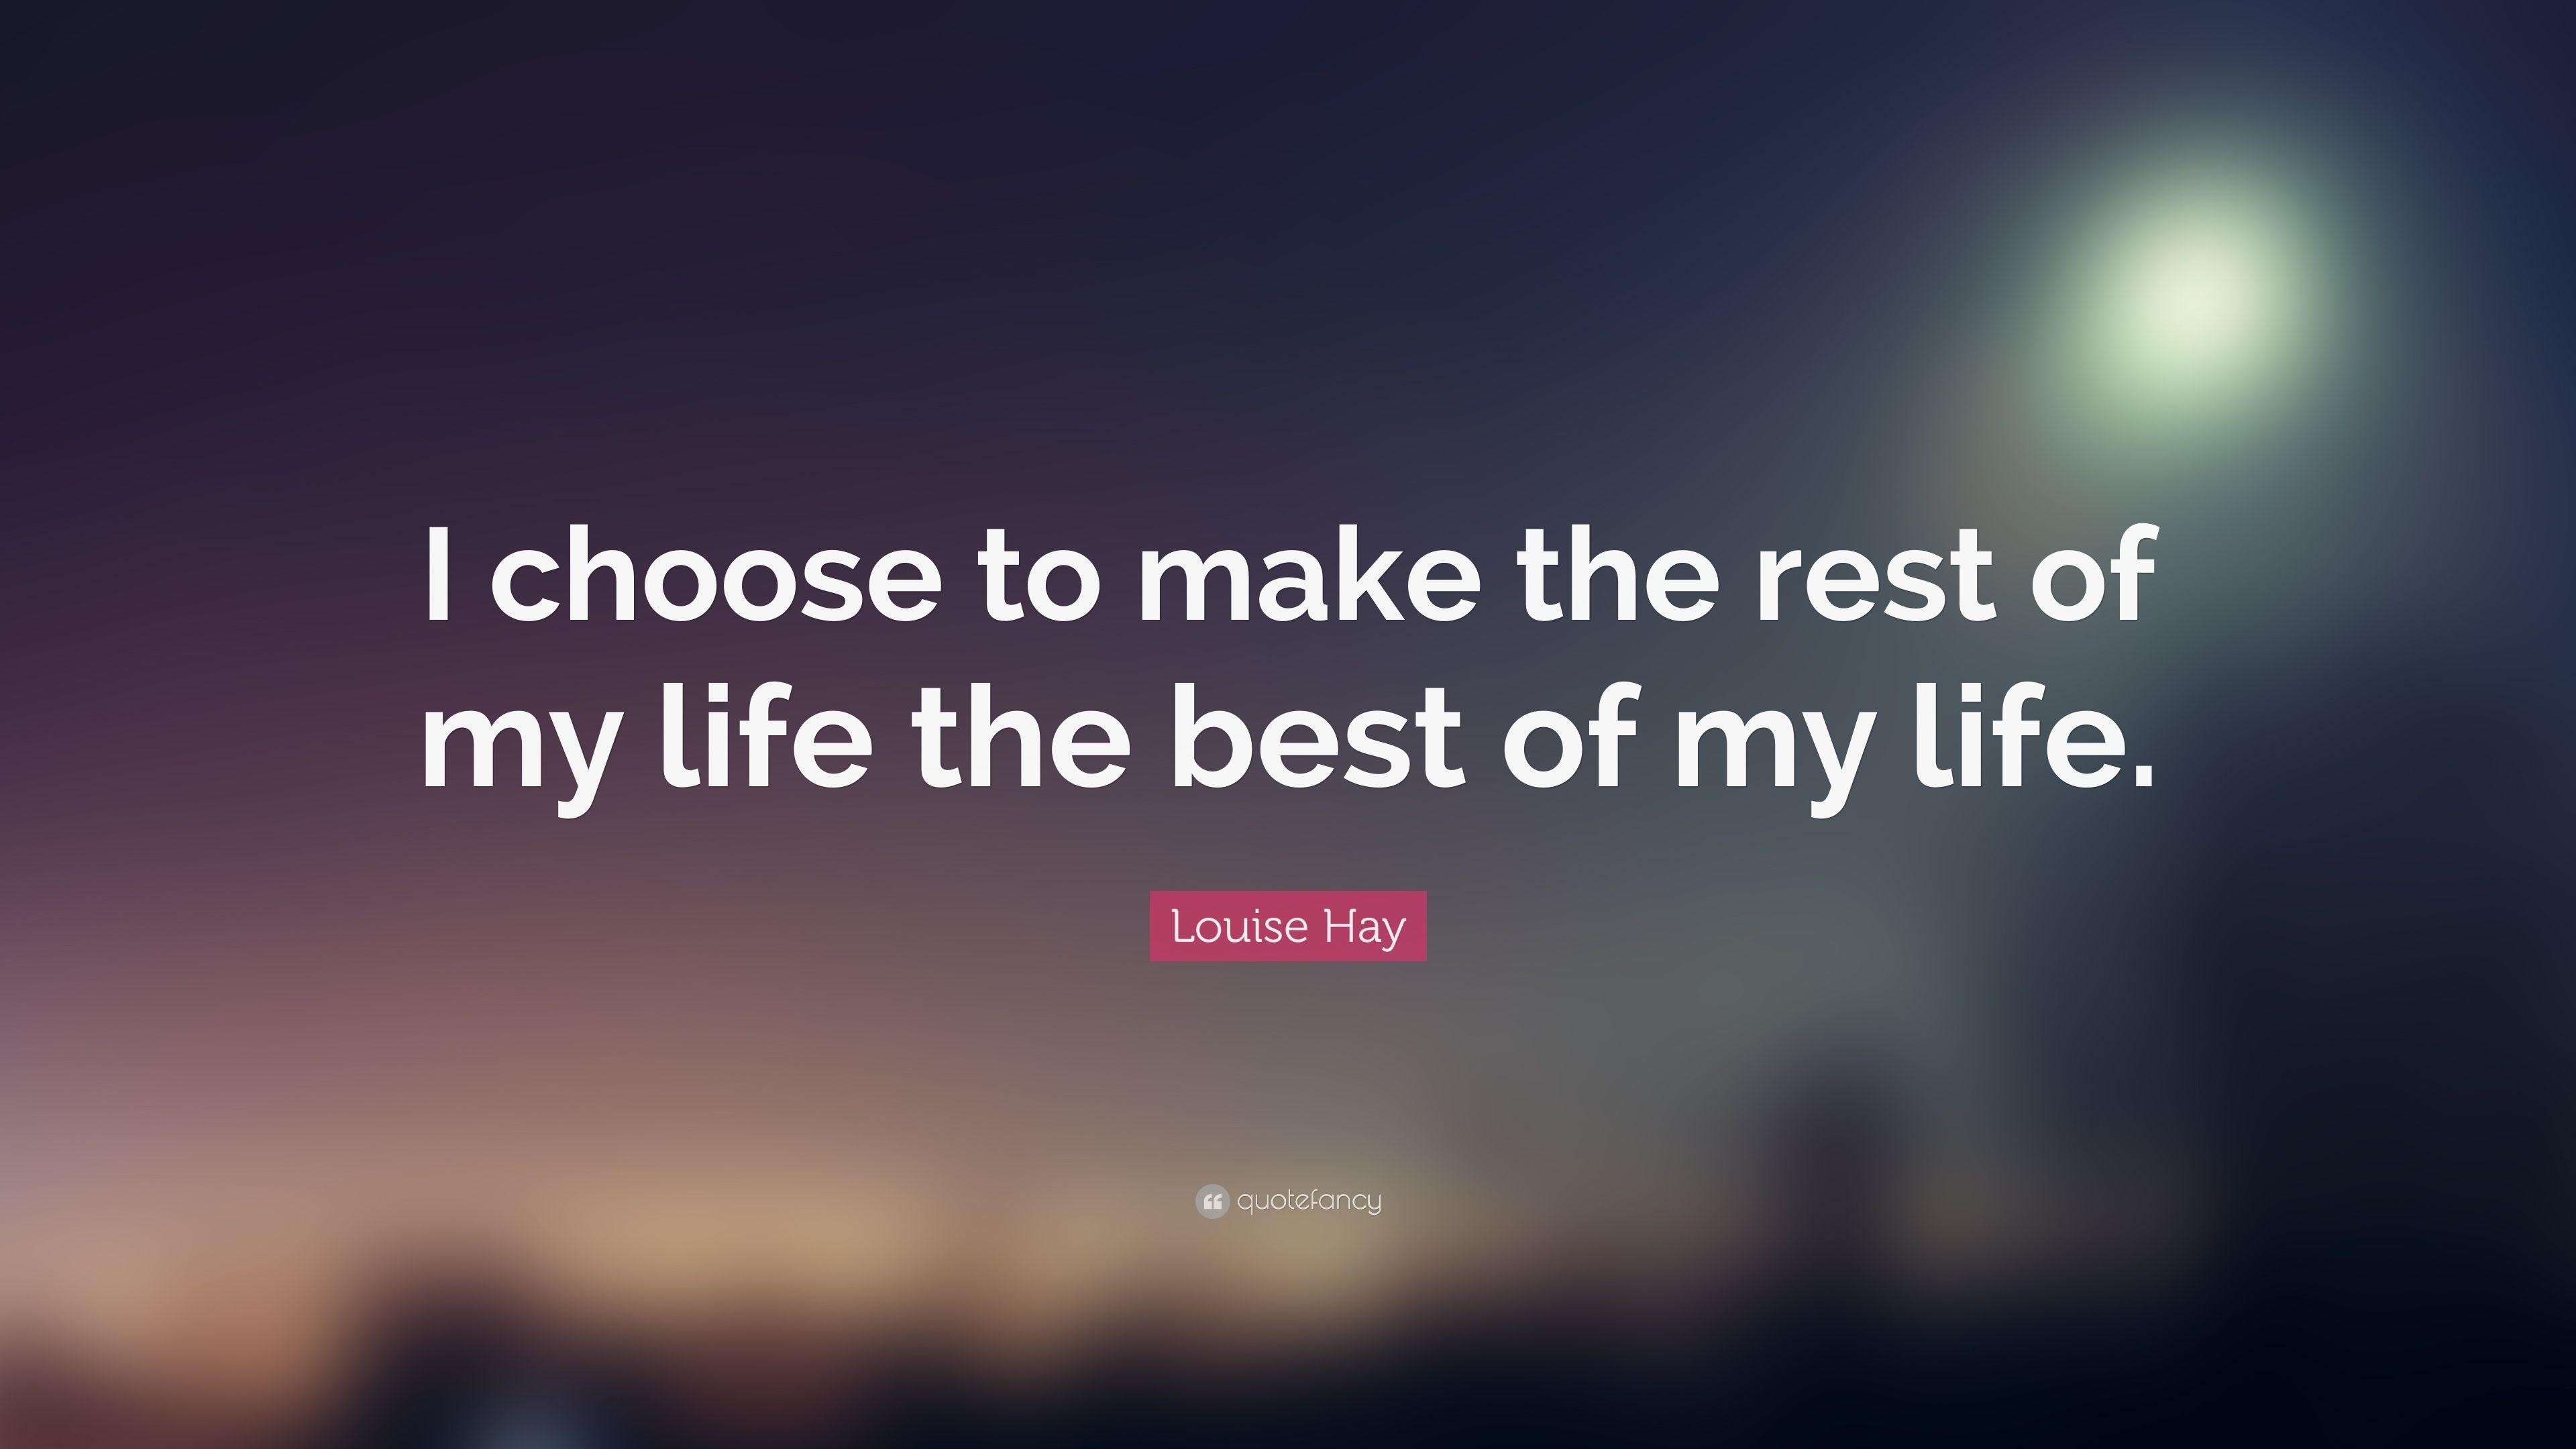 Louise Hay Quote: “I choose to make the rest of my life the best